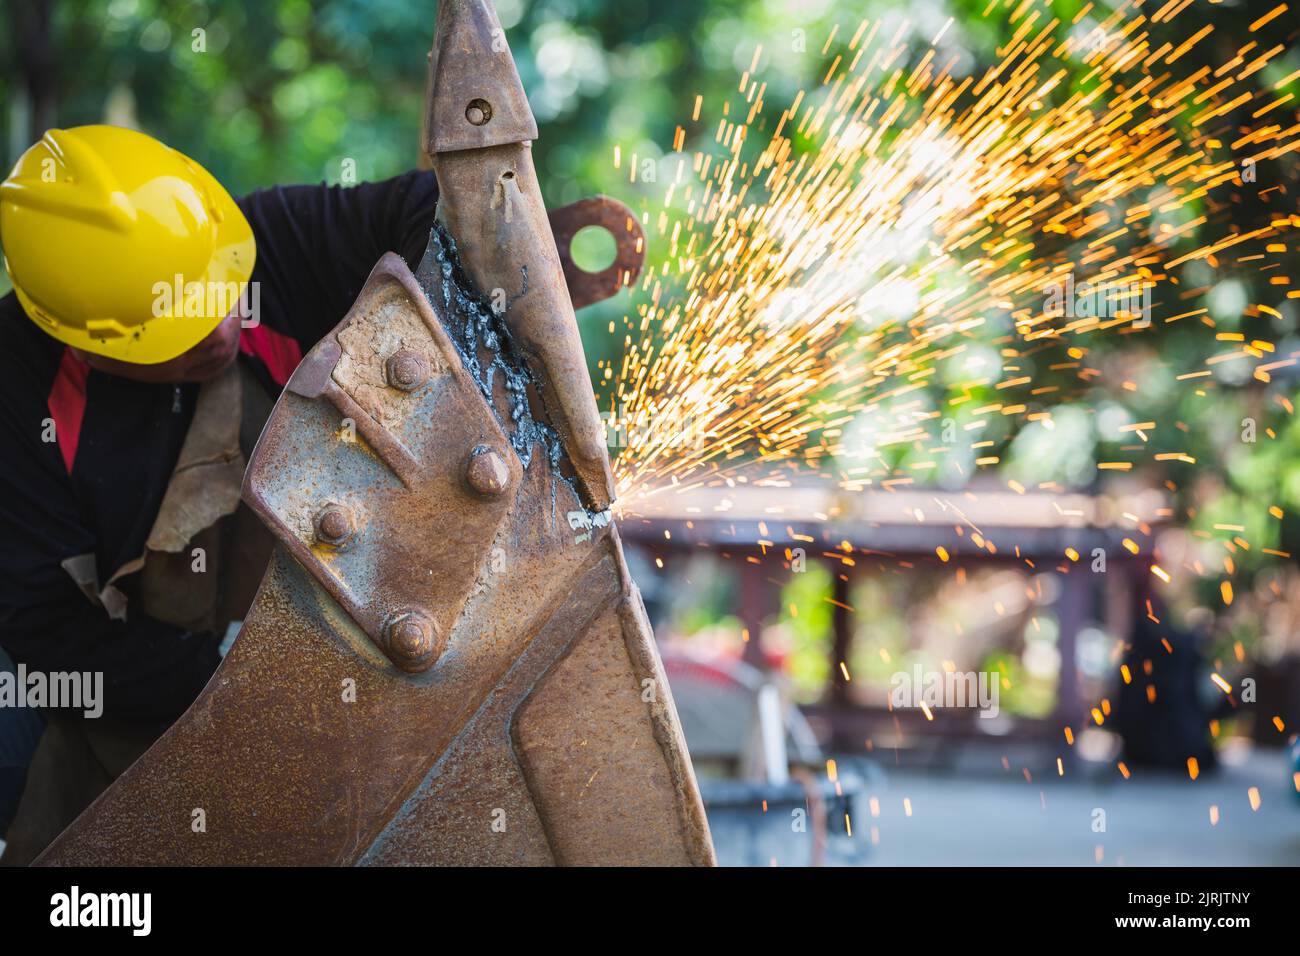 Metal workers use manual labor, steel cutting tools to cut steel. Cut metal. Grinding steel in a factory. Stock Photo